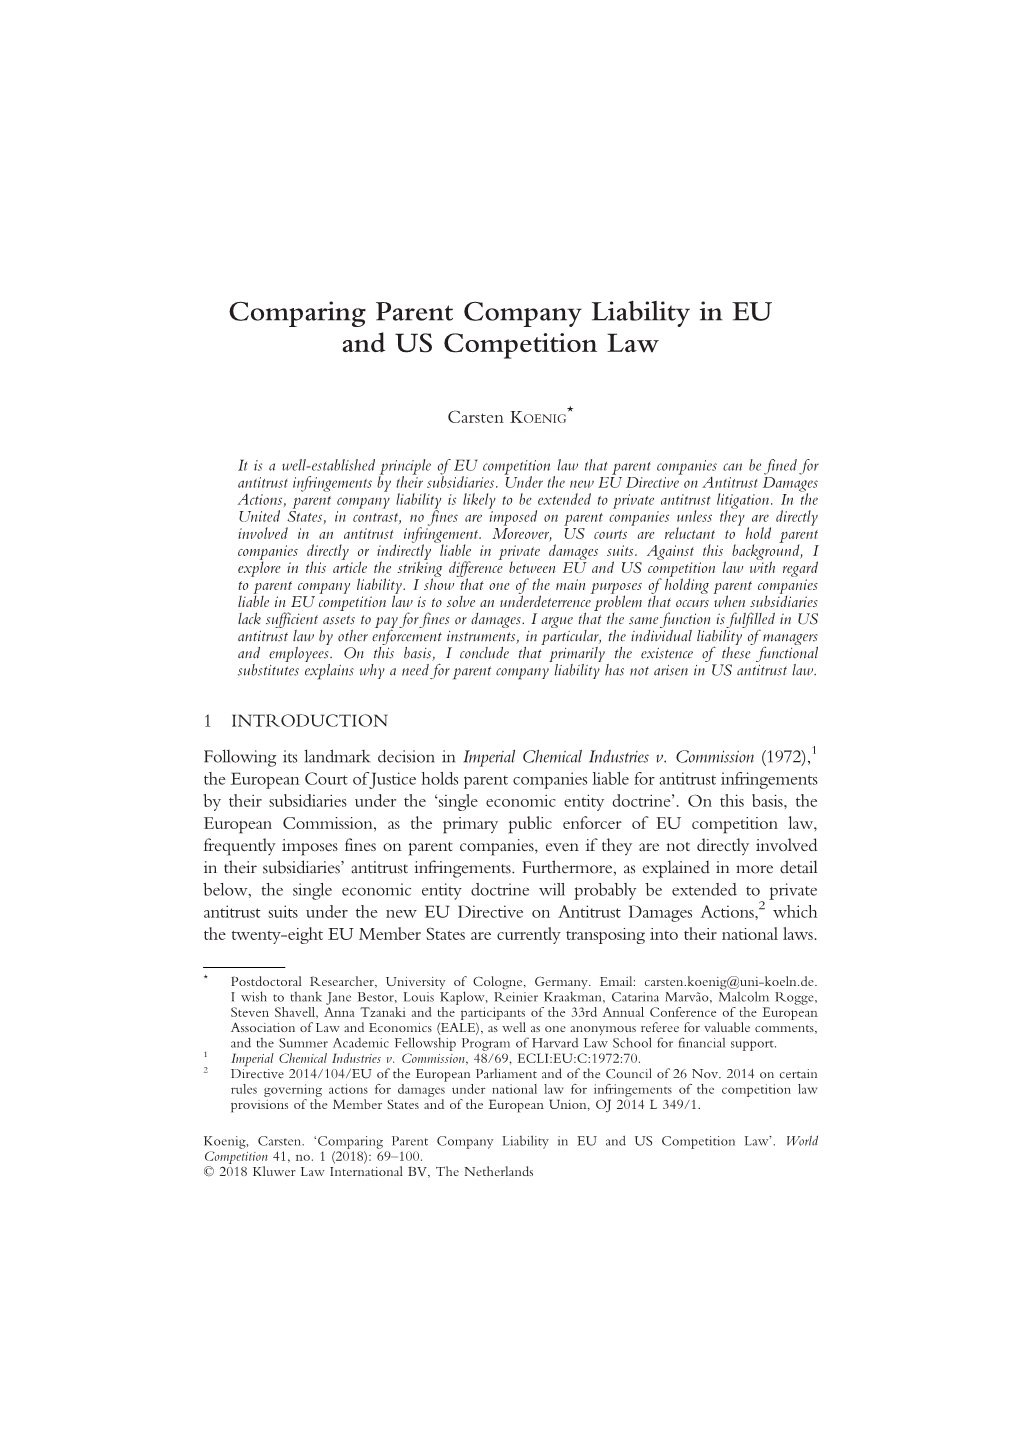 Comparing Parent Company Liability in EU and US Competition Law